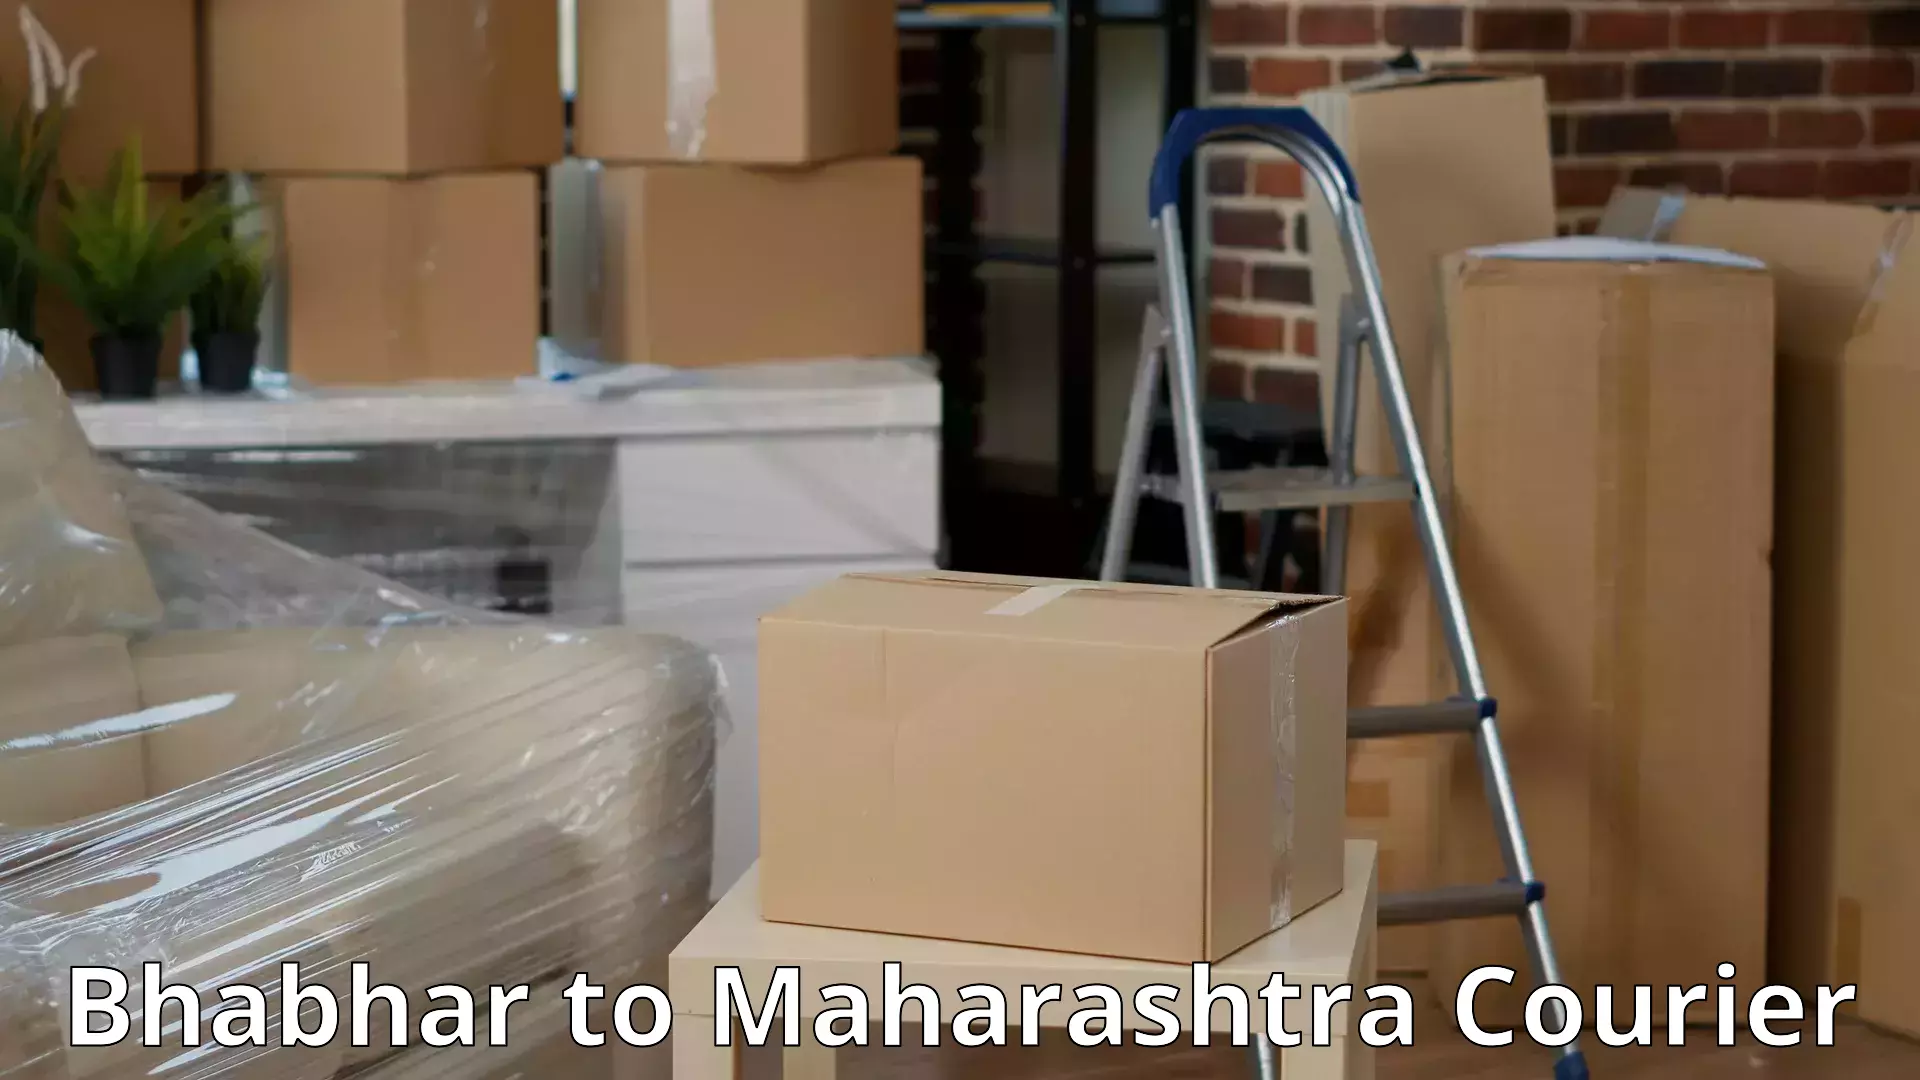 Skilled furniture movers in Bhabhar to Chandrapur